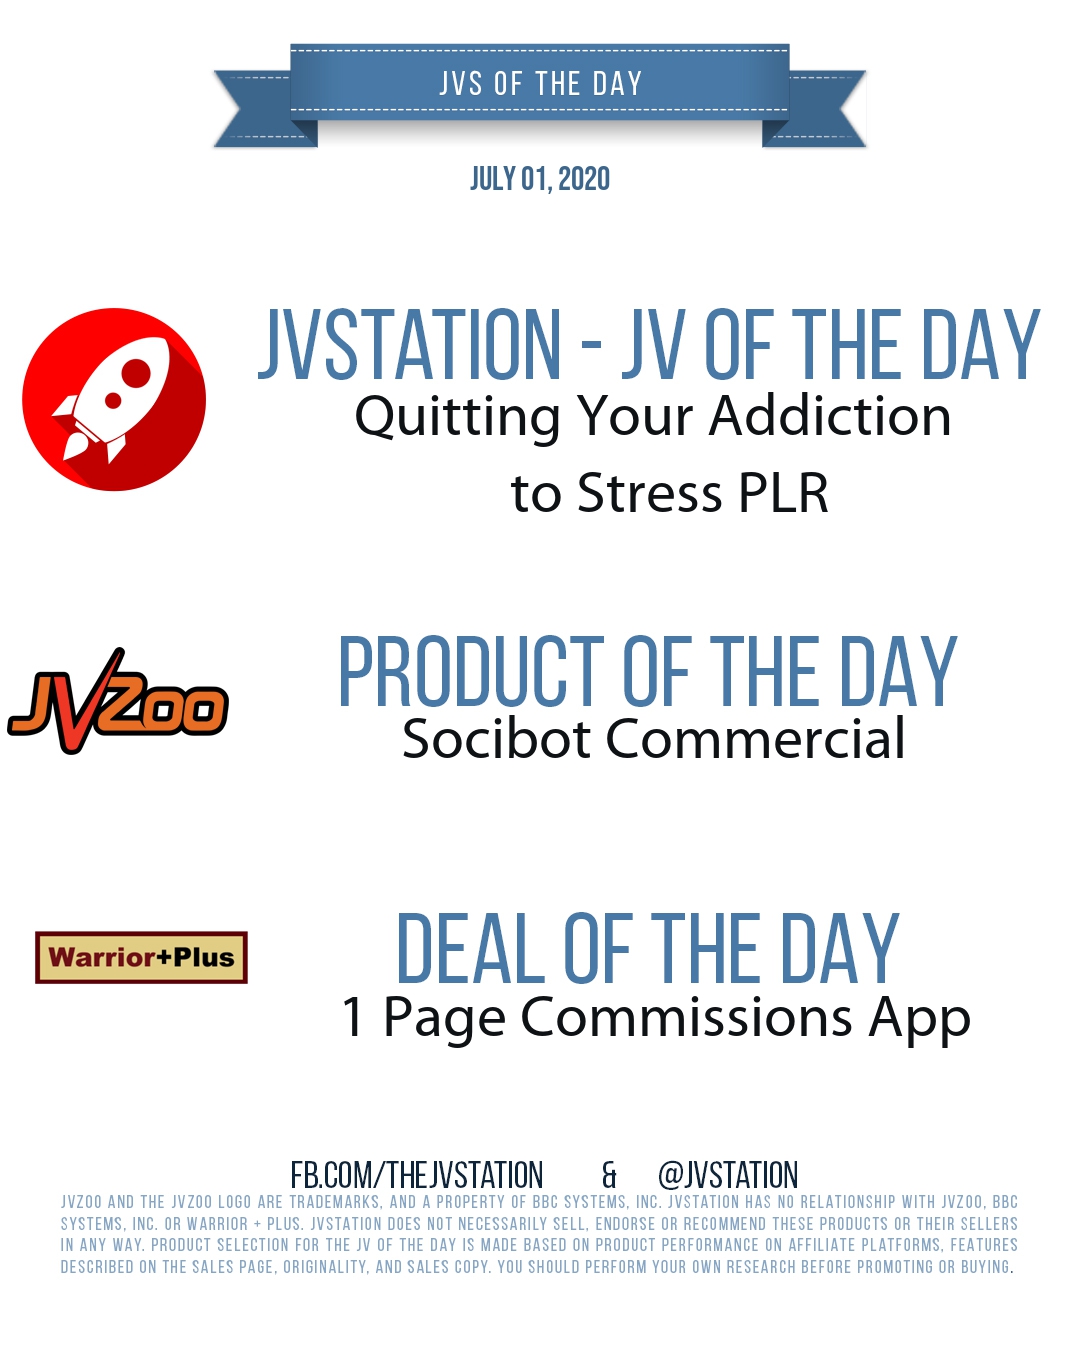 JVs of the day - July 01, 2020